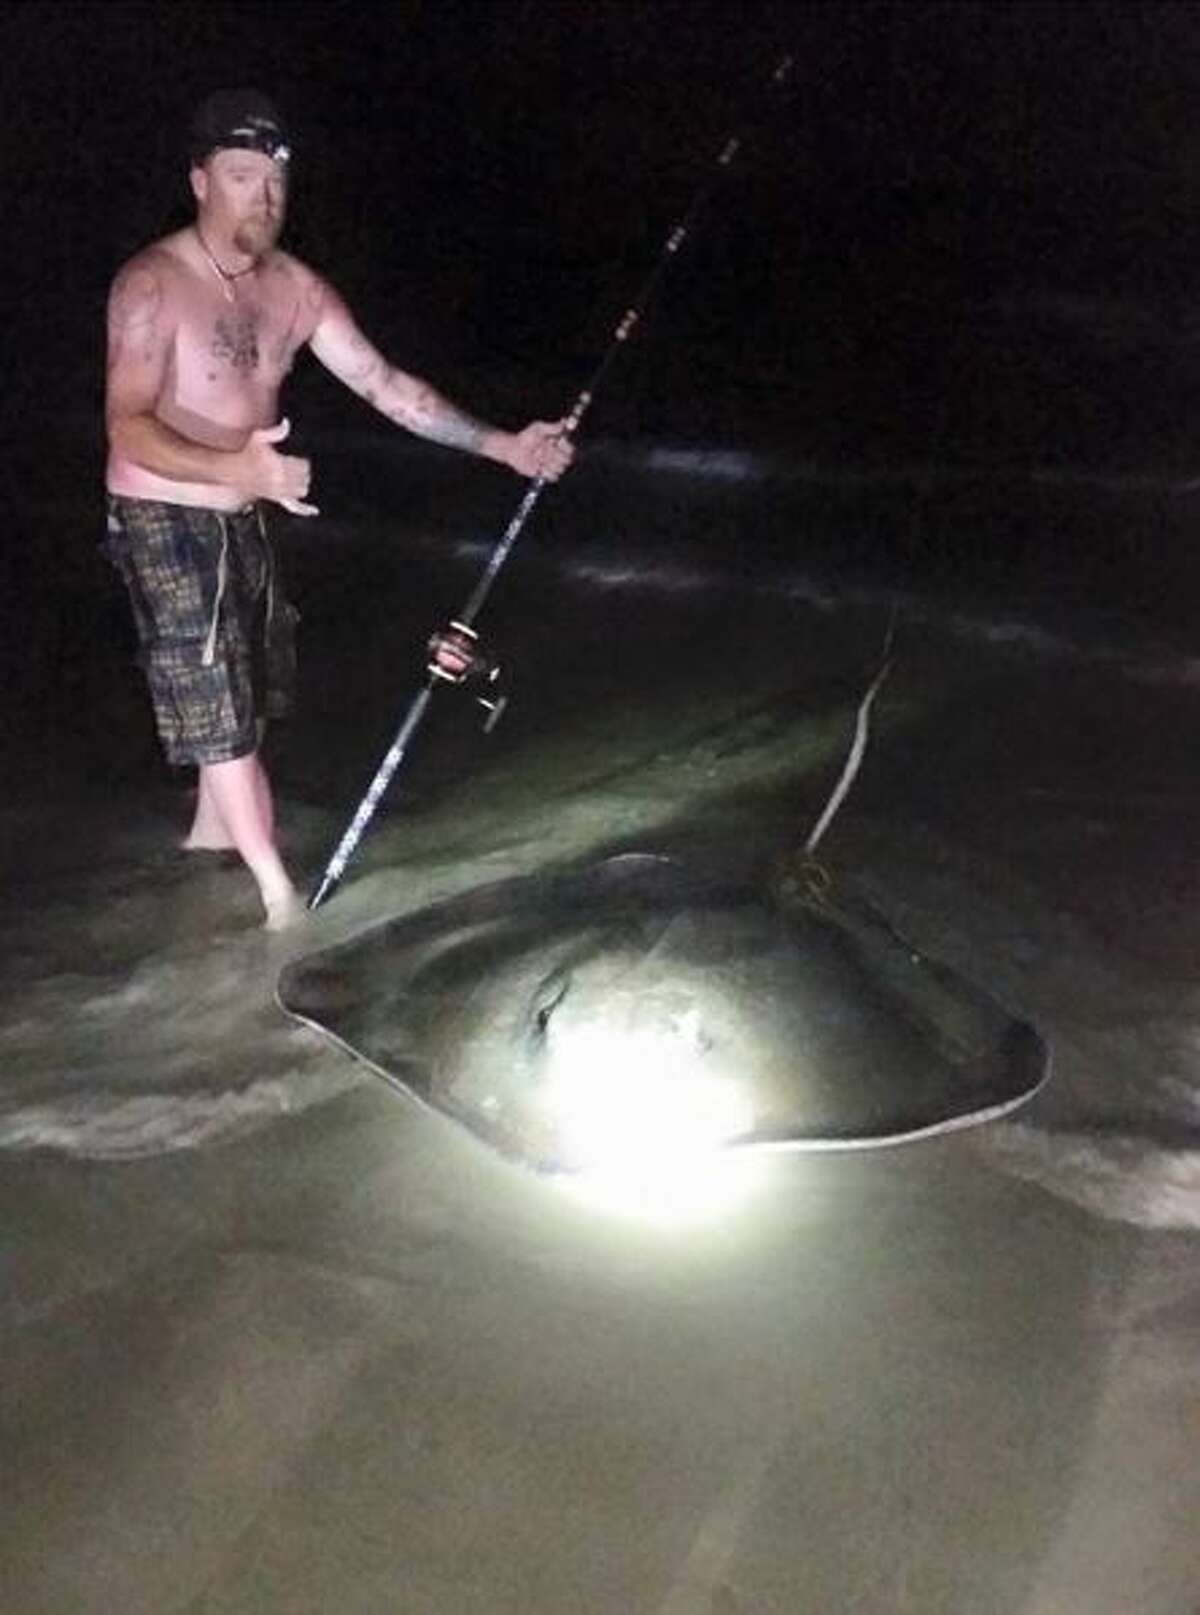 A Blanco man faced what sounded like a modern day Old Man and the Sea tale when he pulled in a 200-pound stingray Saturday night off the Corpus Christi shore, after battling it for more than three hours.